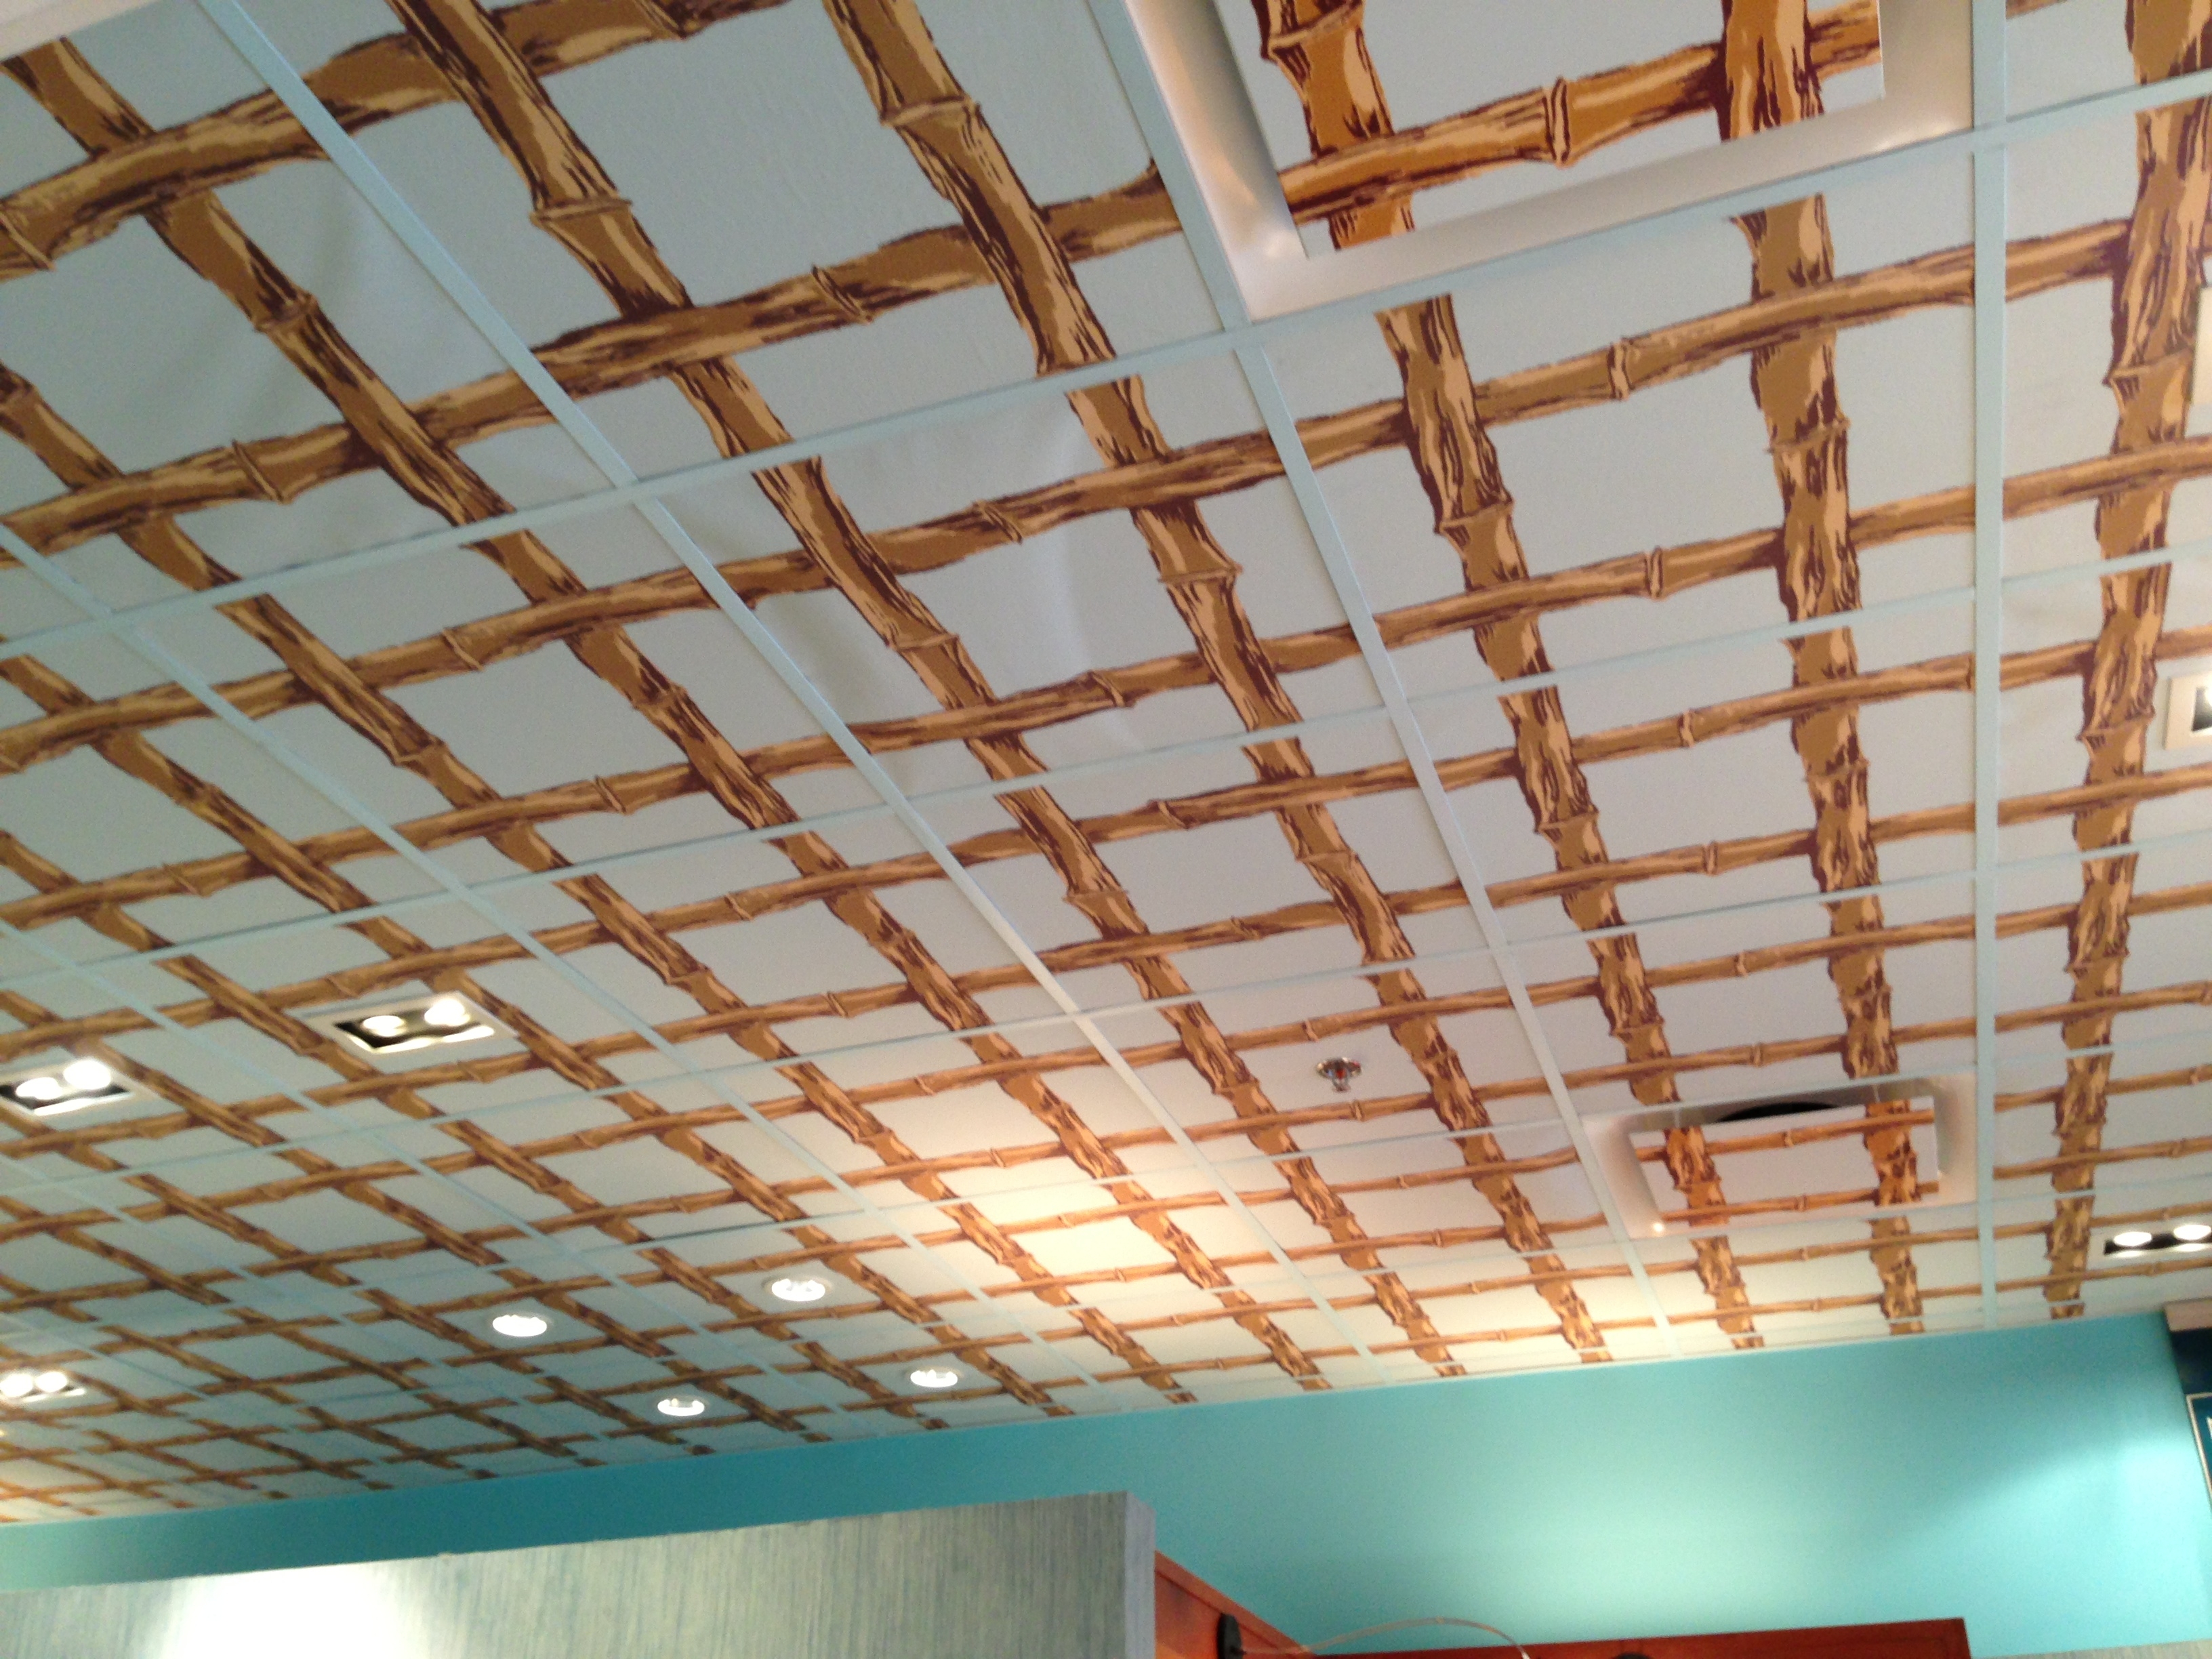 Cover Ceiling Tiles With Wallpaper